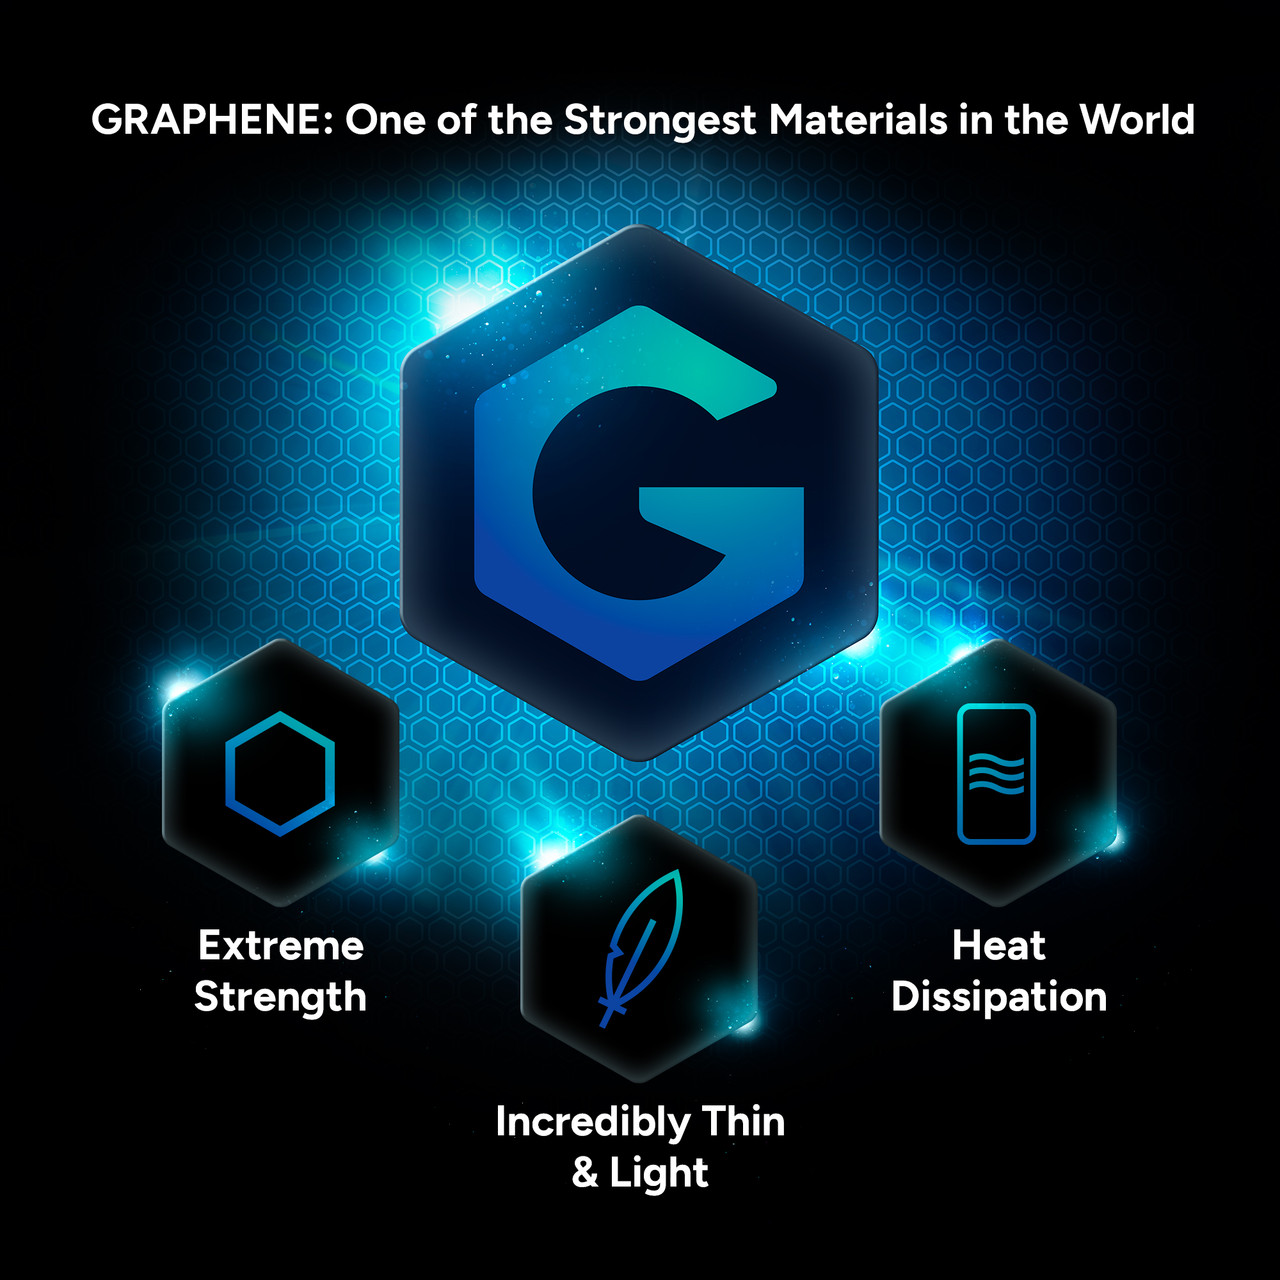 Strengthened with Graphene||
|Denali has been infused with Graphene, the strongest material on earth.